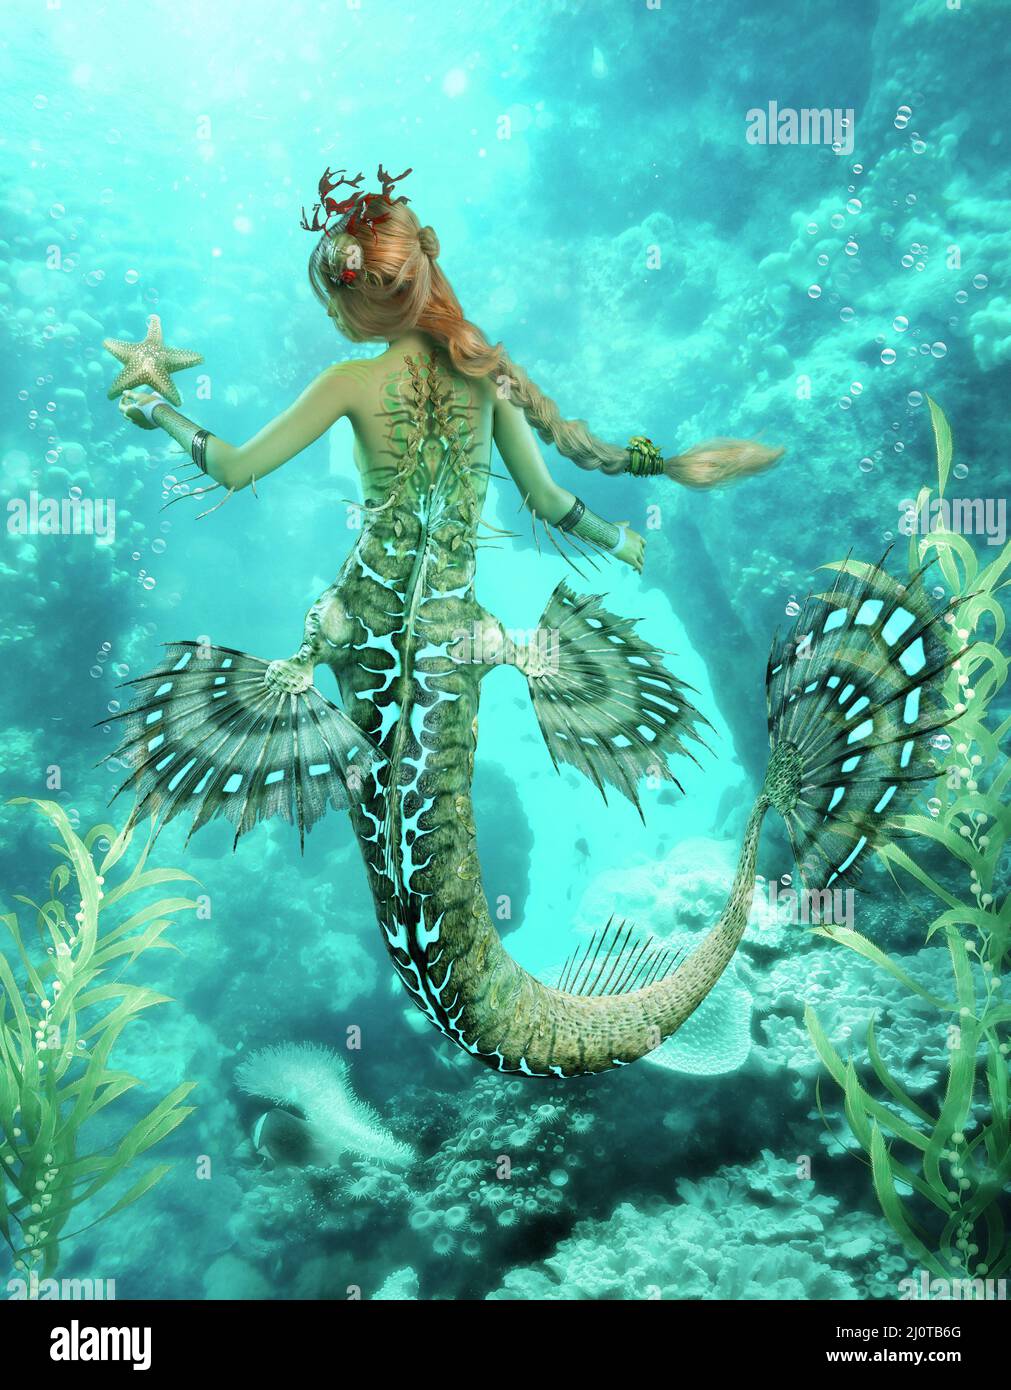 3d computer graphics of a mermaid with starfish Stock Photo